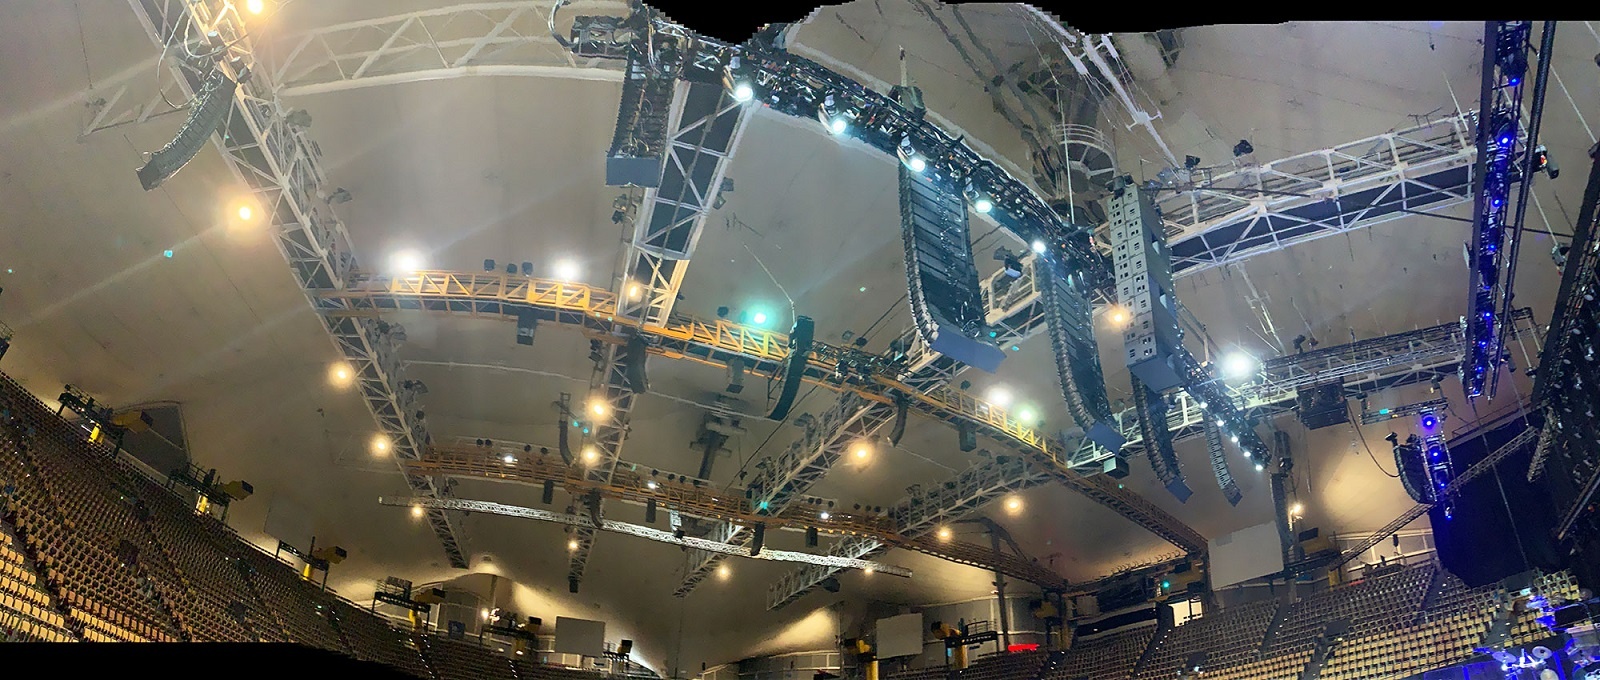 K series sound system set up by L-Acoustics at the Mark Knopfler Down the Road Wherever Tour